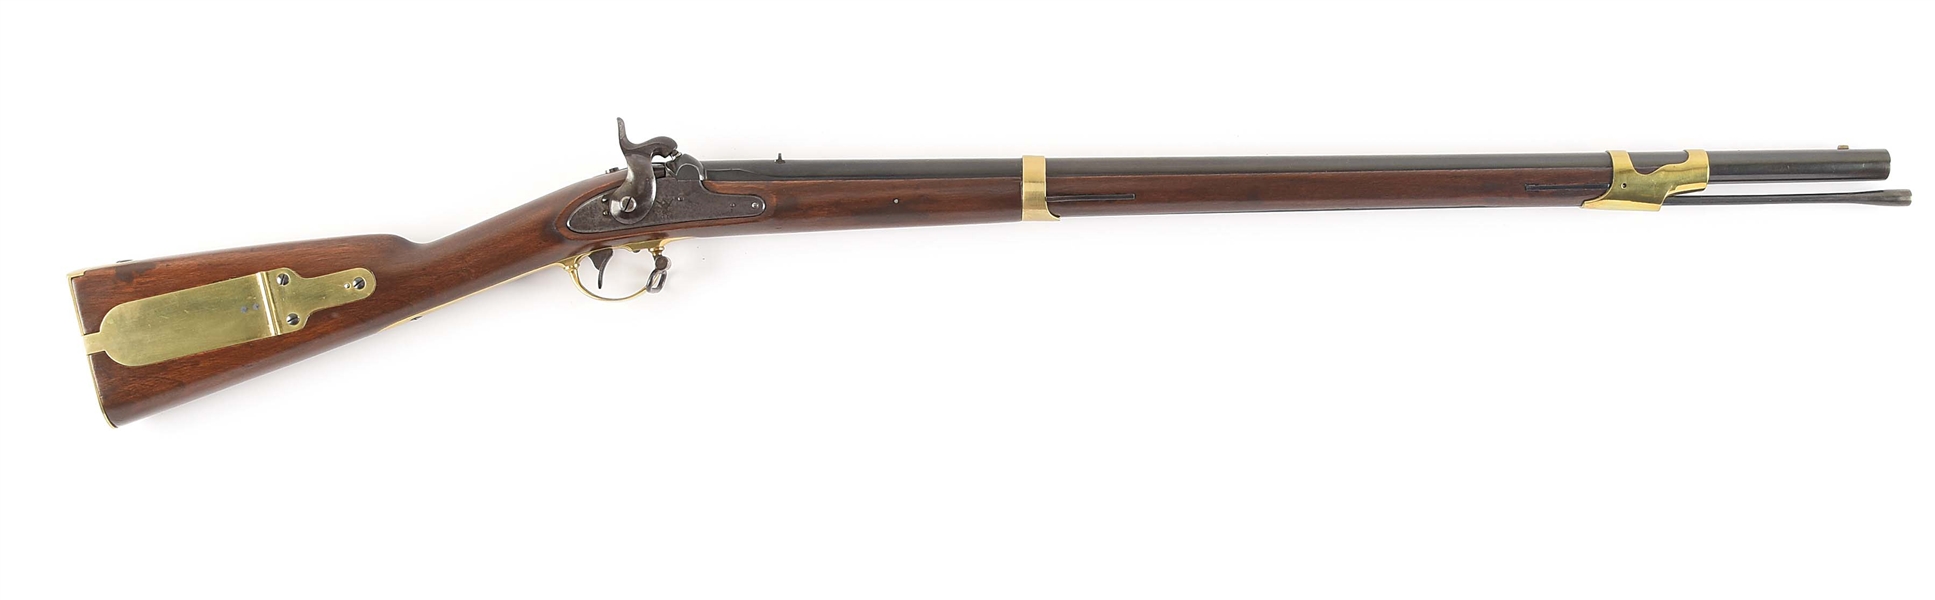 (A) HARPERS FERRY MODEL 1841 MISSISSIPPI RIFLE DATED 1850.